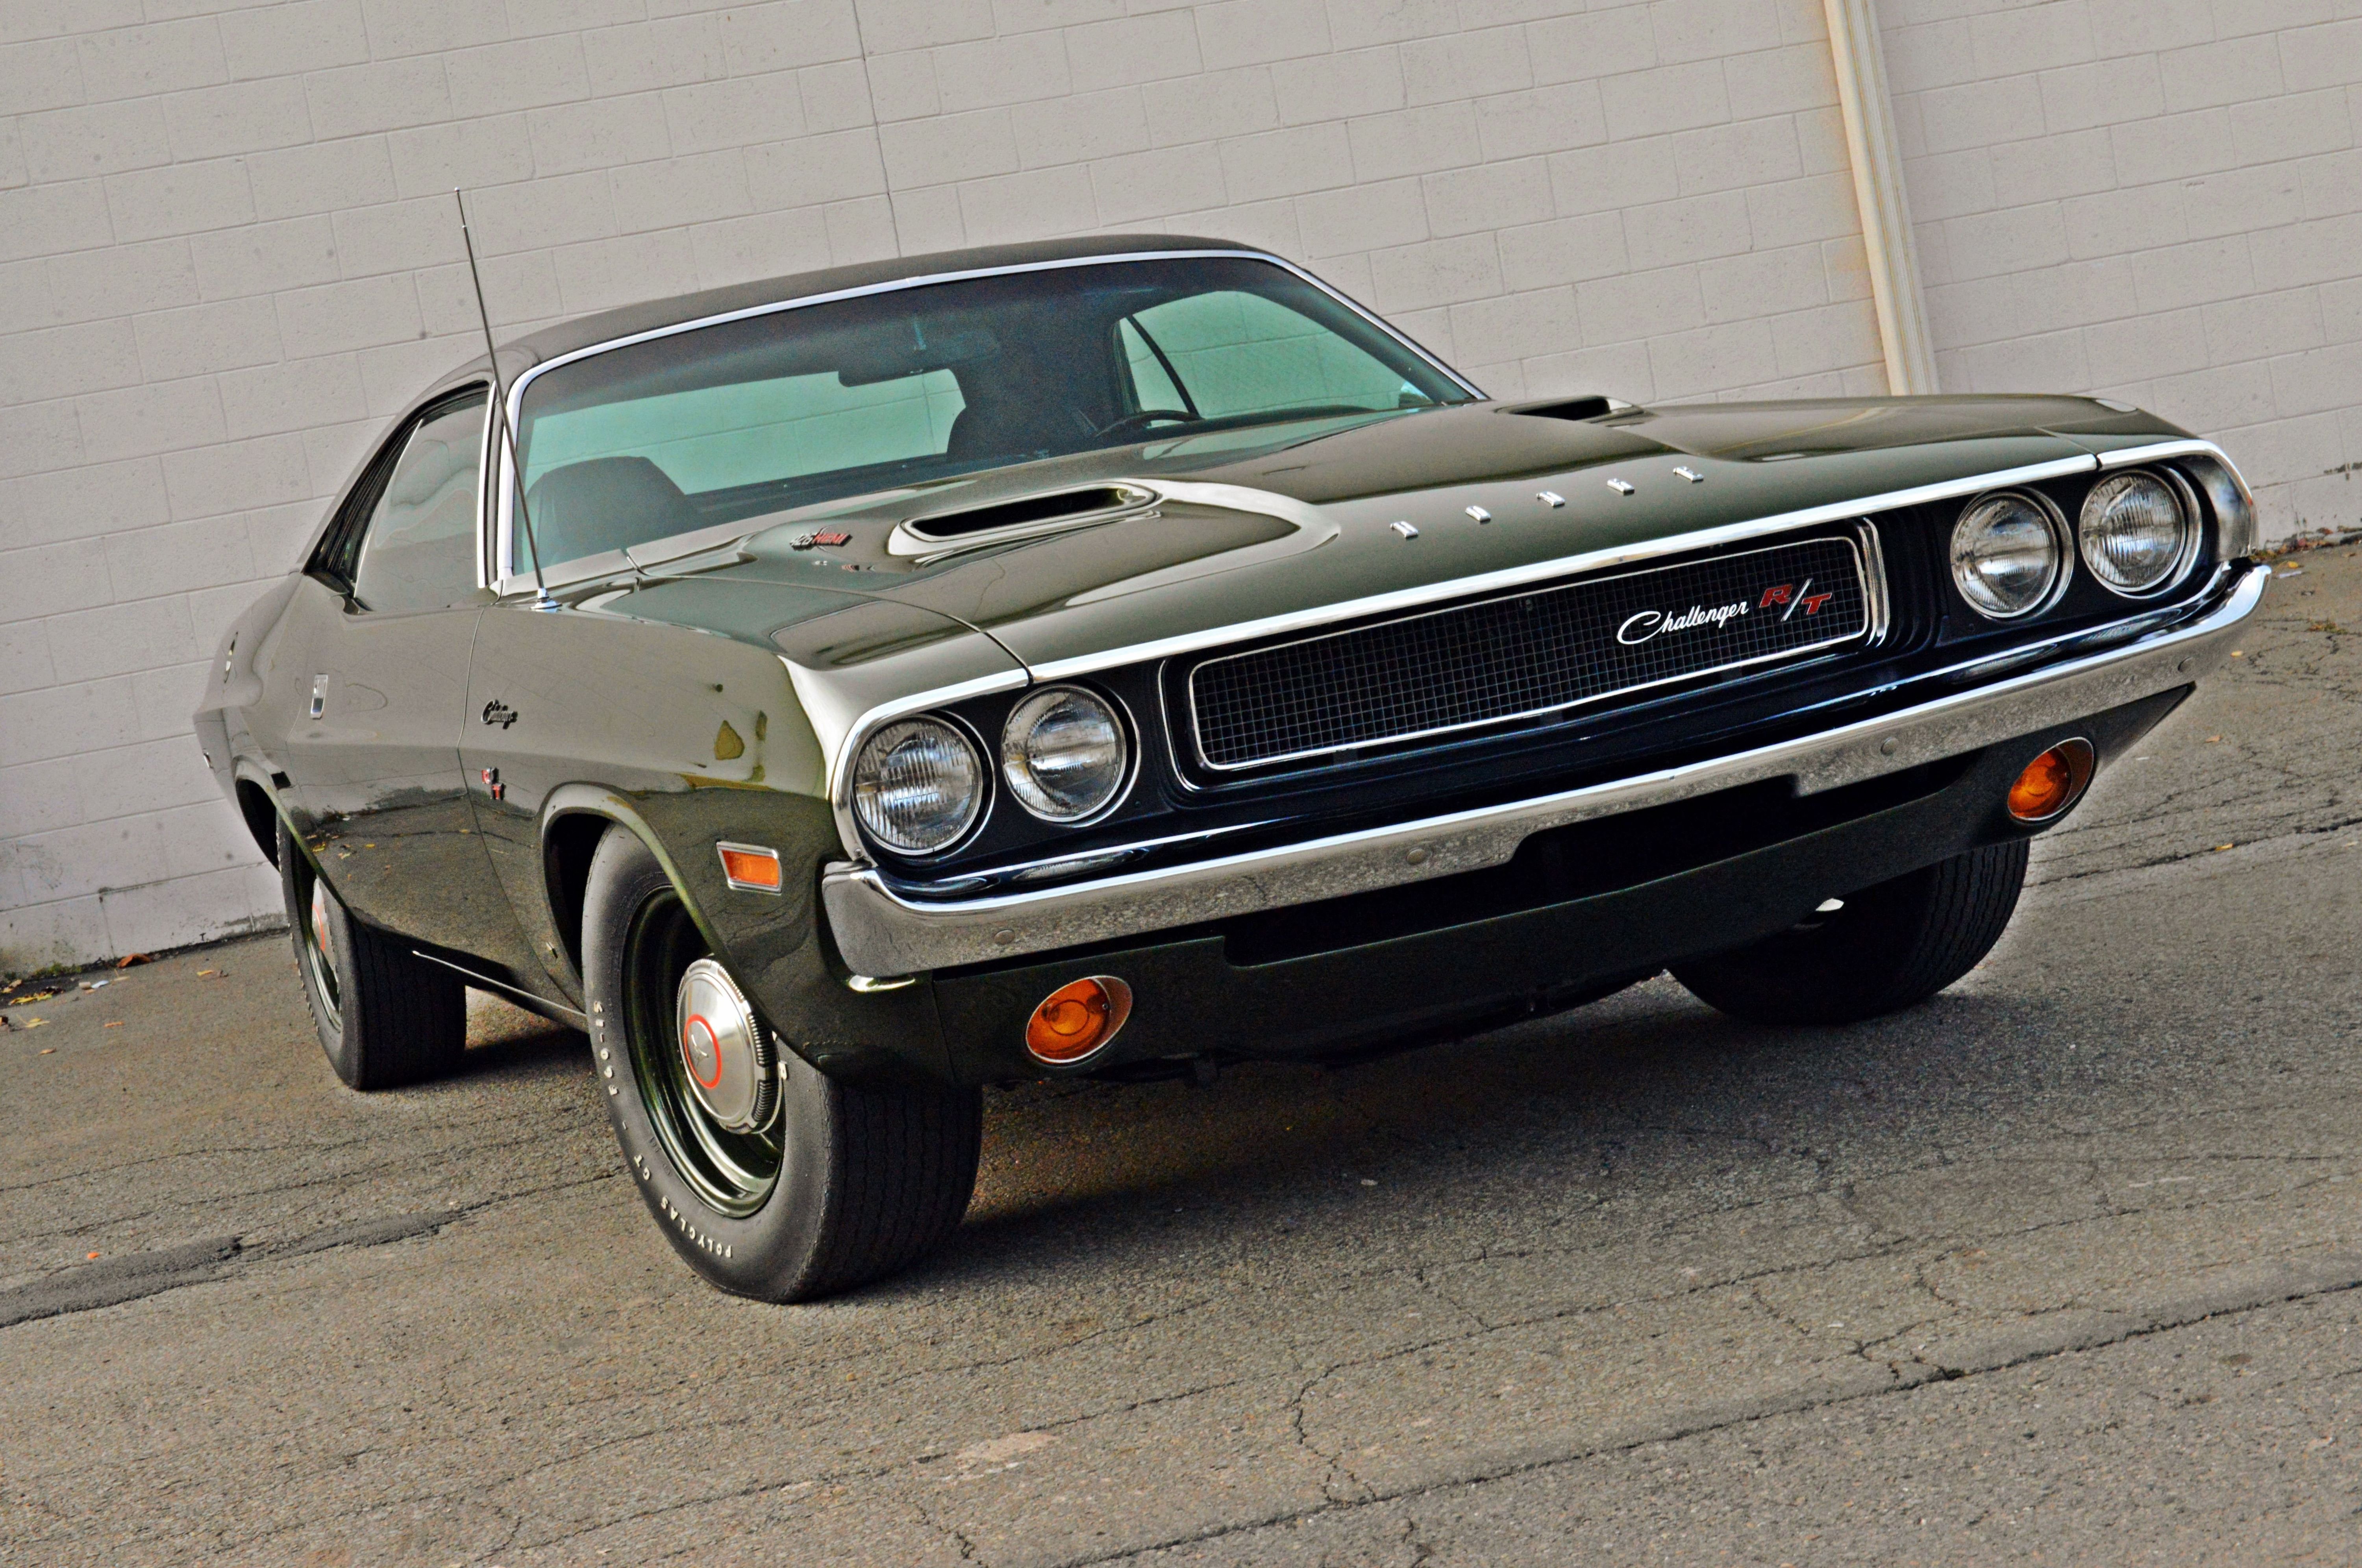 1970, Dodge, Challenger, Rt, Muscle, Classic, Old, Original, Usa, 6000x3985 02 Wallpaper